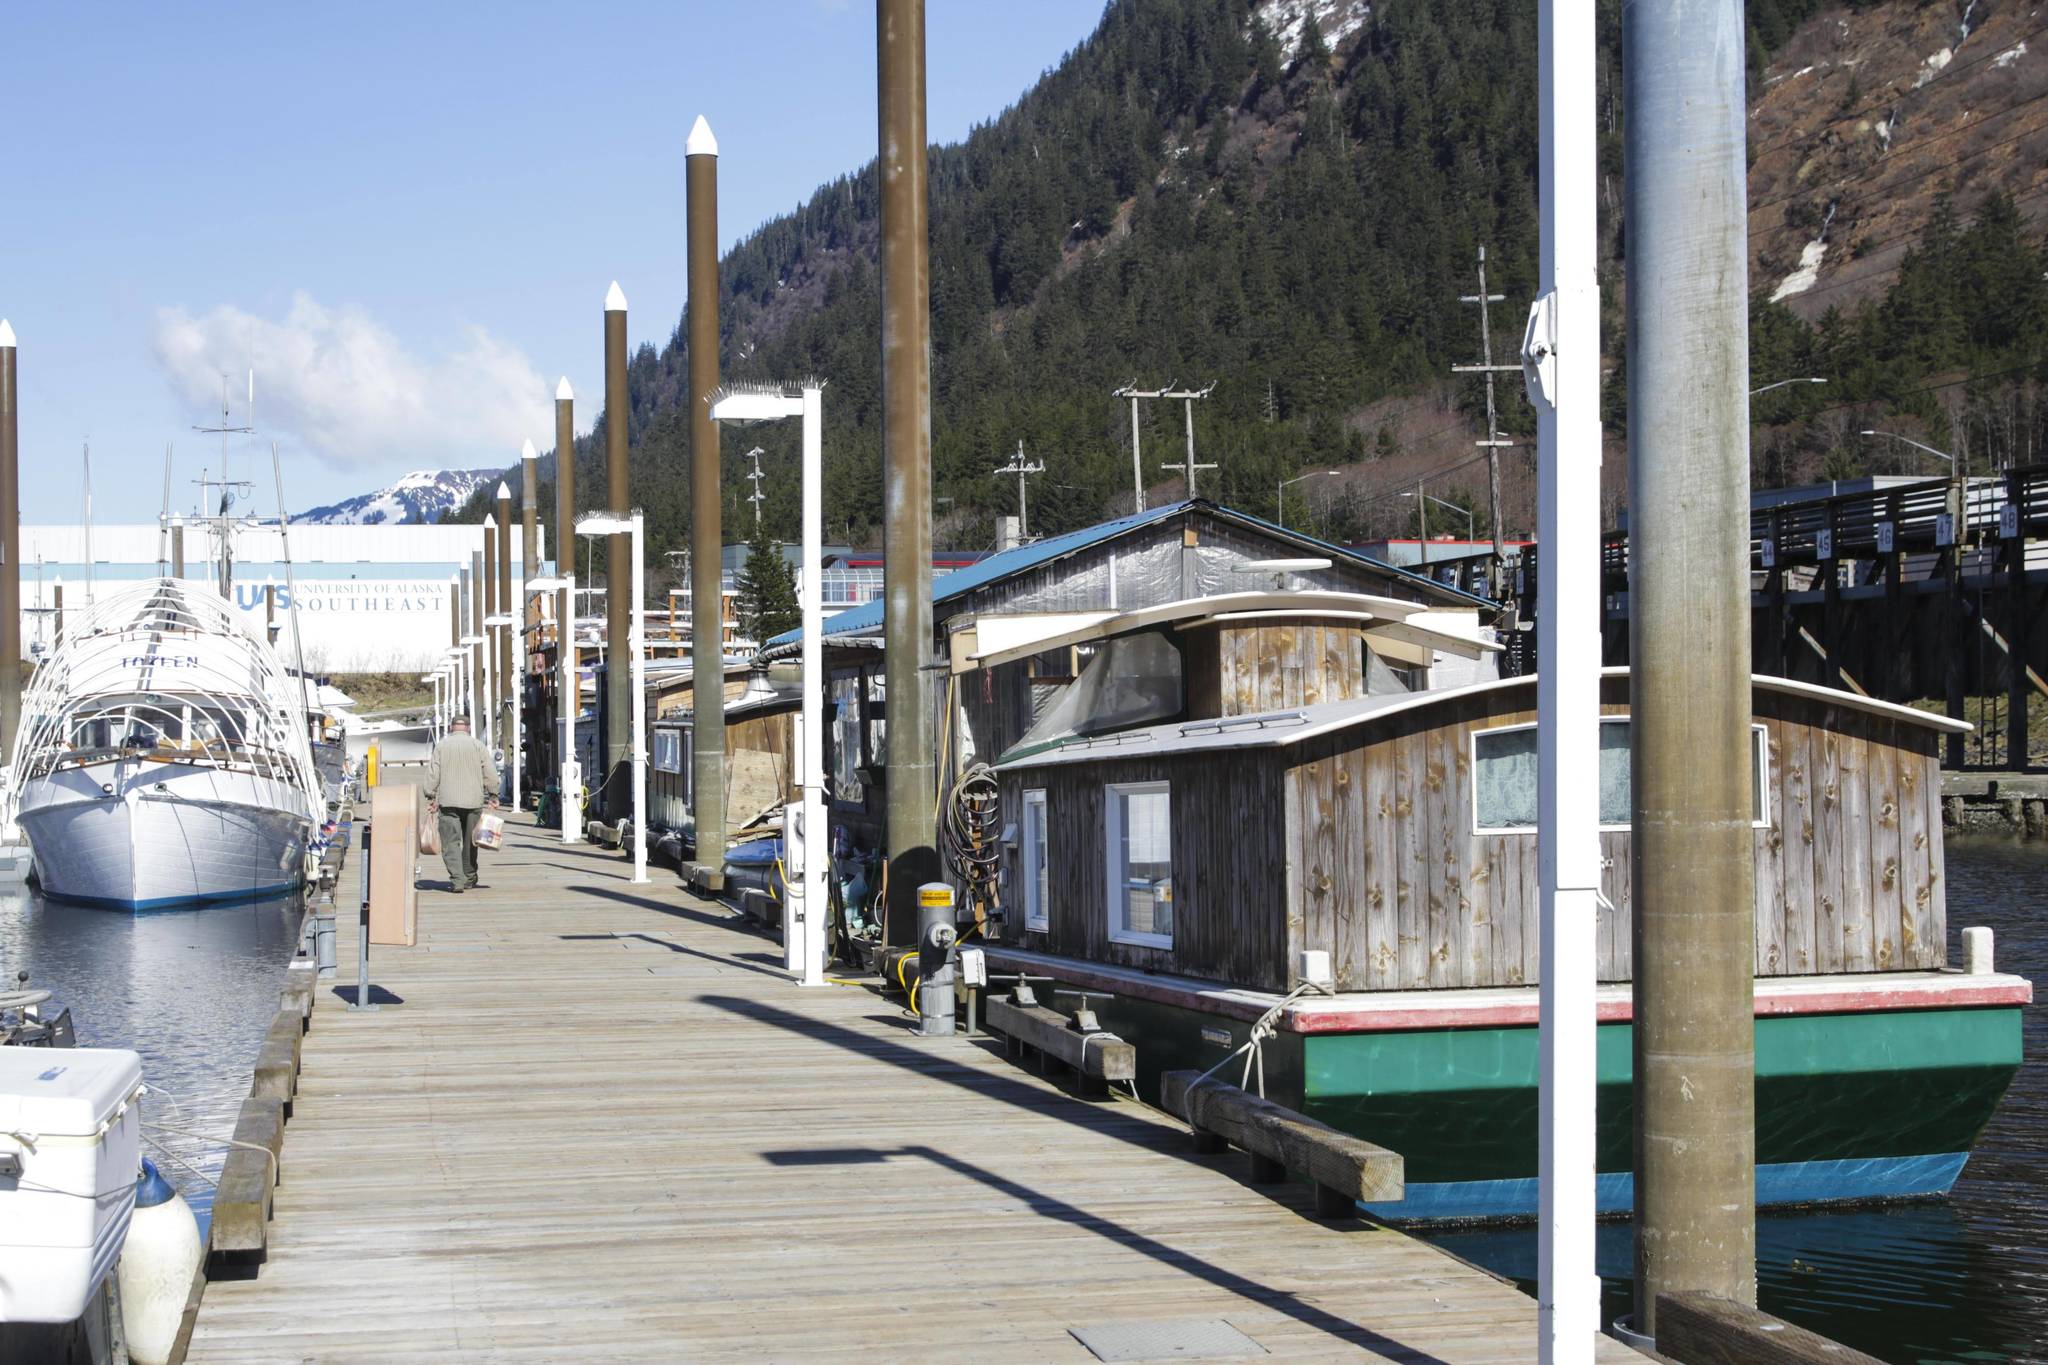 Michael S. Lockett / Juneau Empire 
A proposal to the Docks and Harbors board to double residency fees for live-aboard residents of Juneau’s harbors have rankled many.